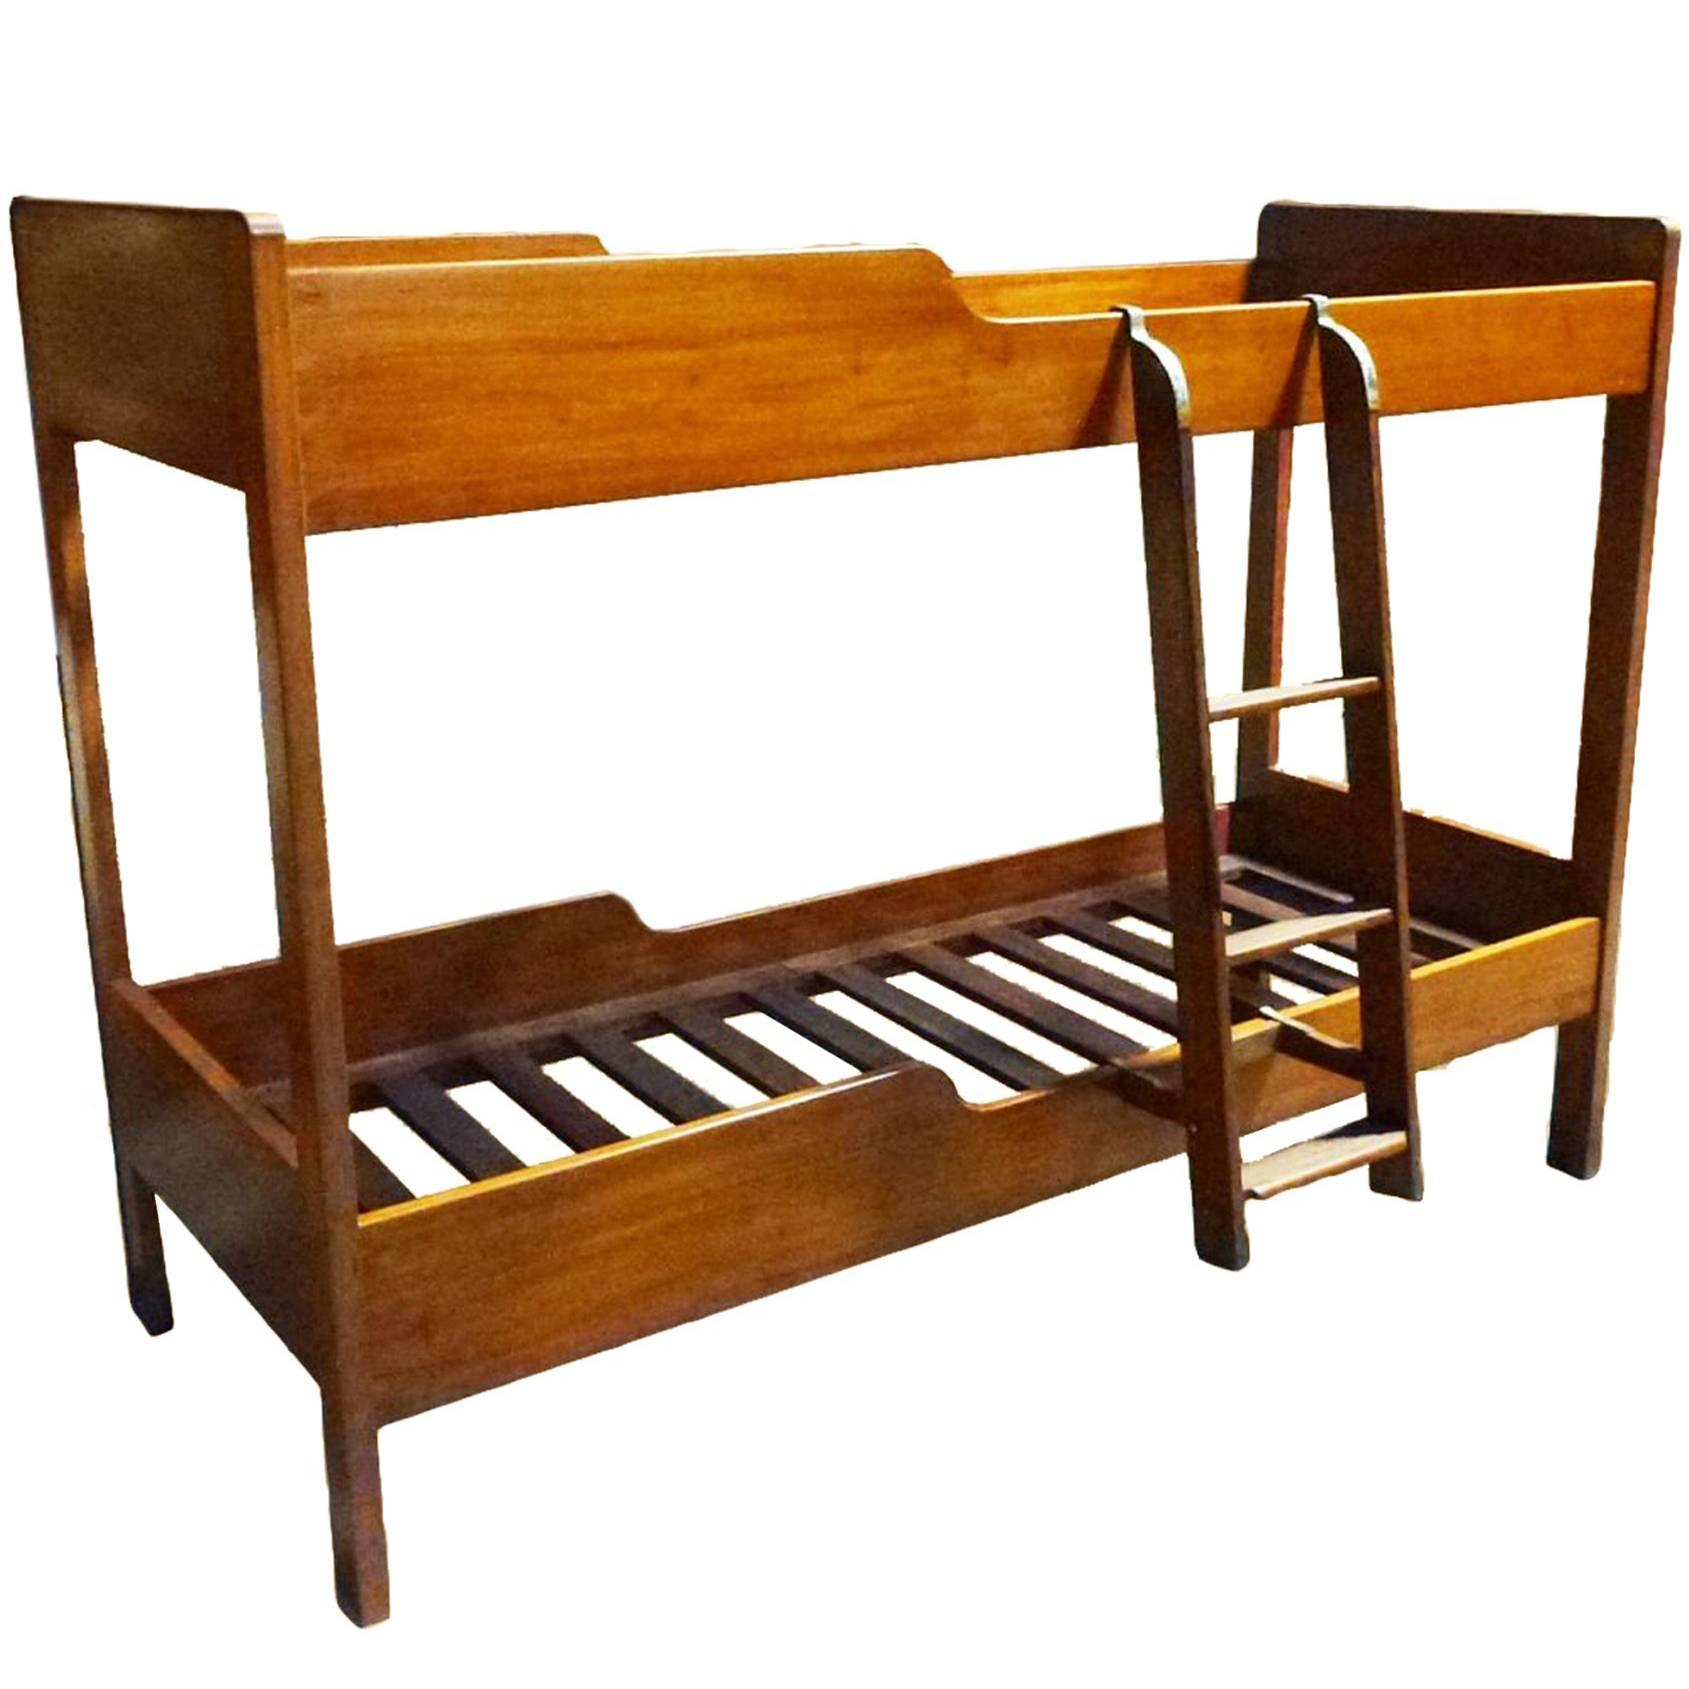 1952 Bunk Bed from Passenger Ship Augustus